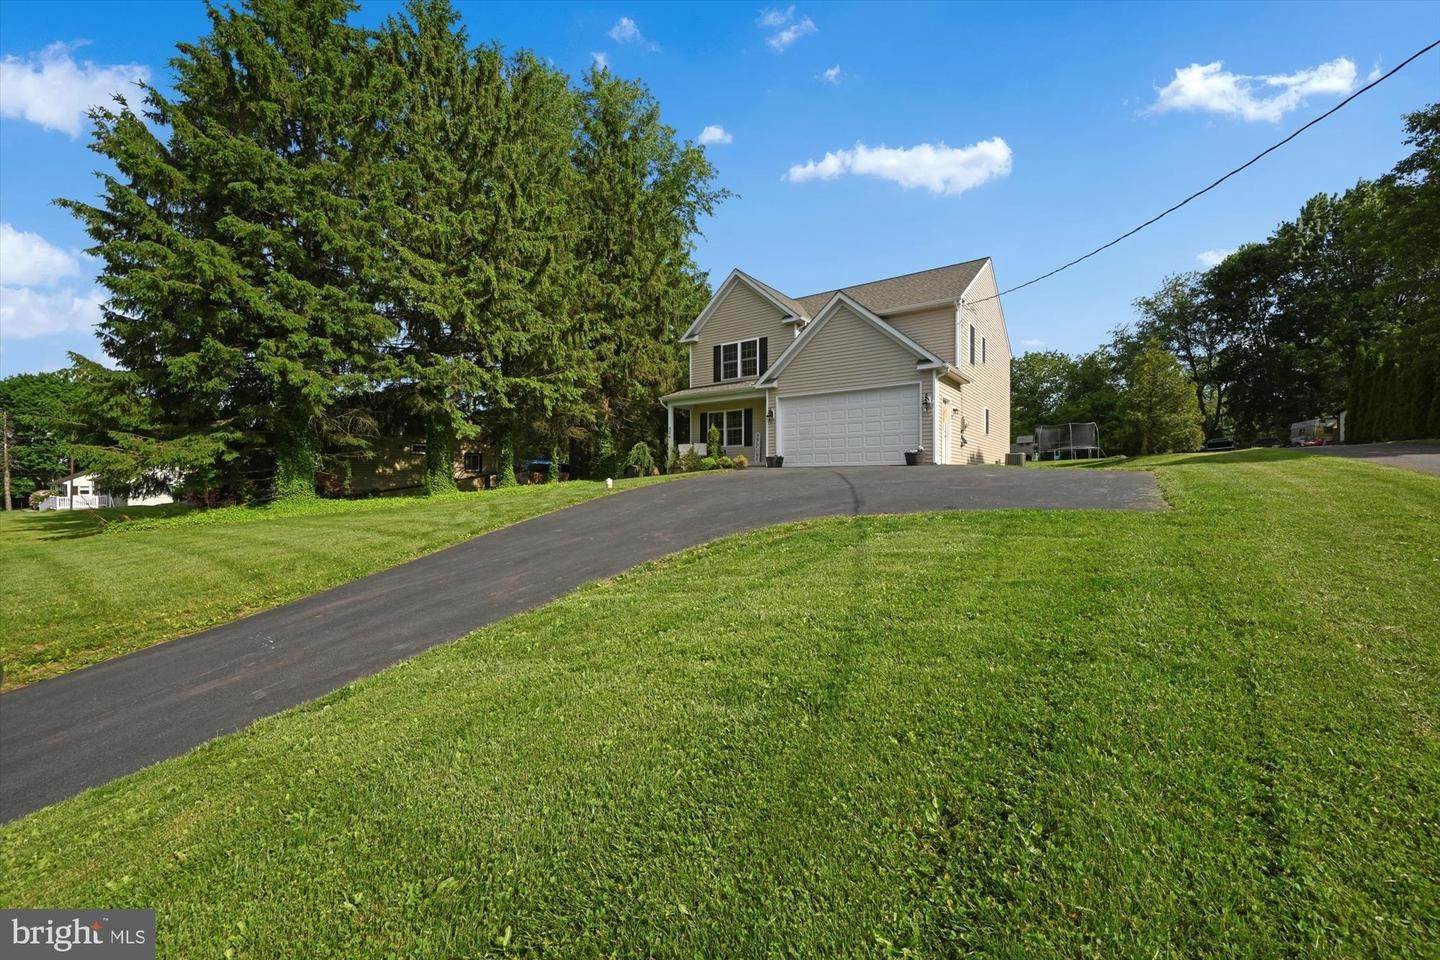 Residential for Sale at 824 HOPELAND Road Lititz, Pennsylvania 17543 United States